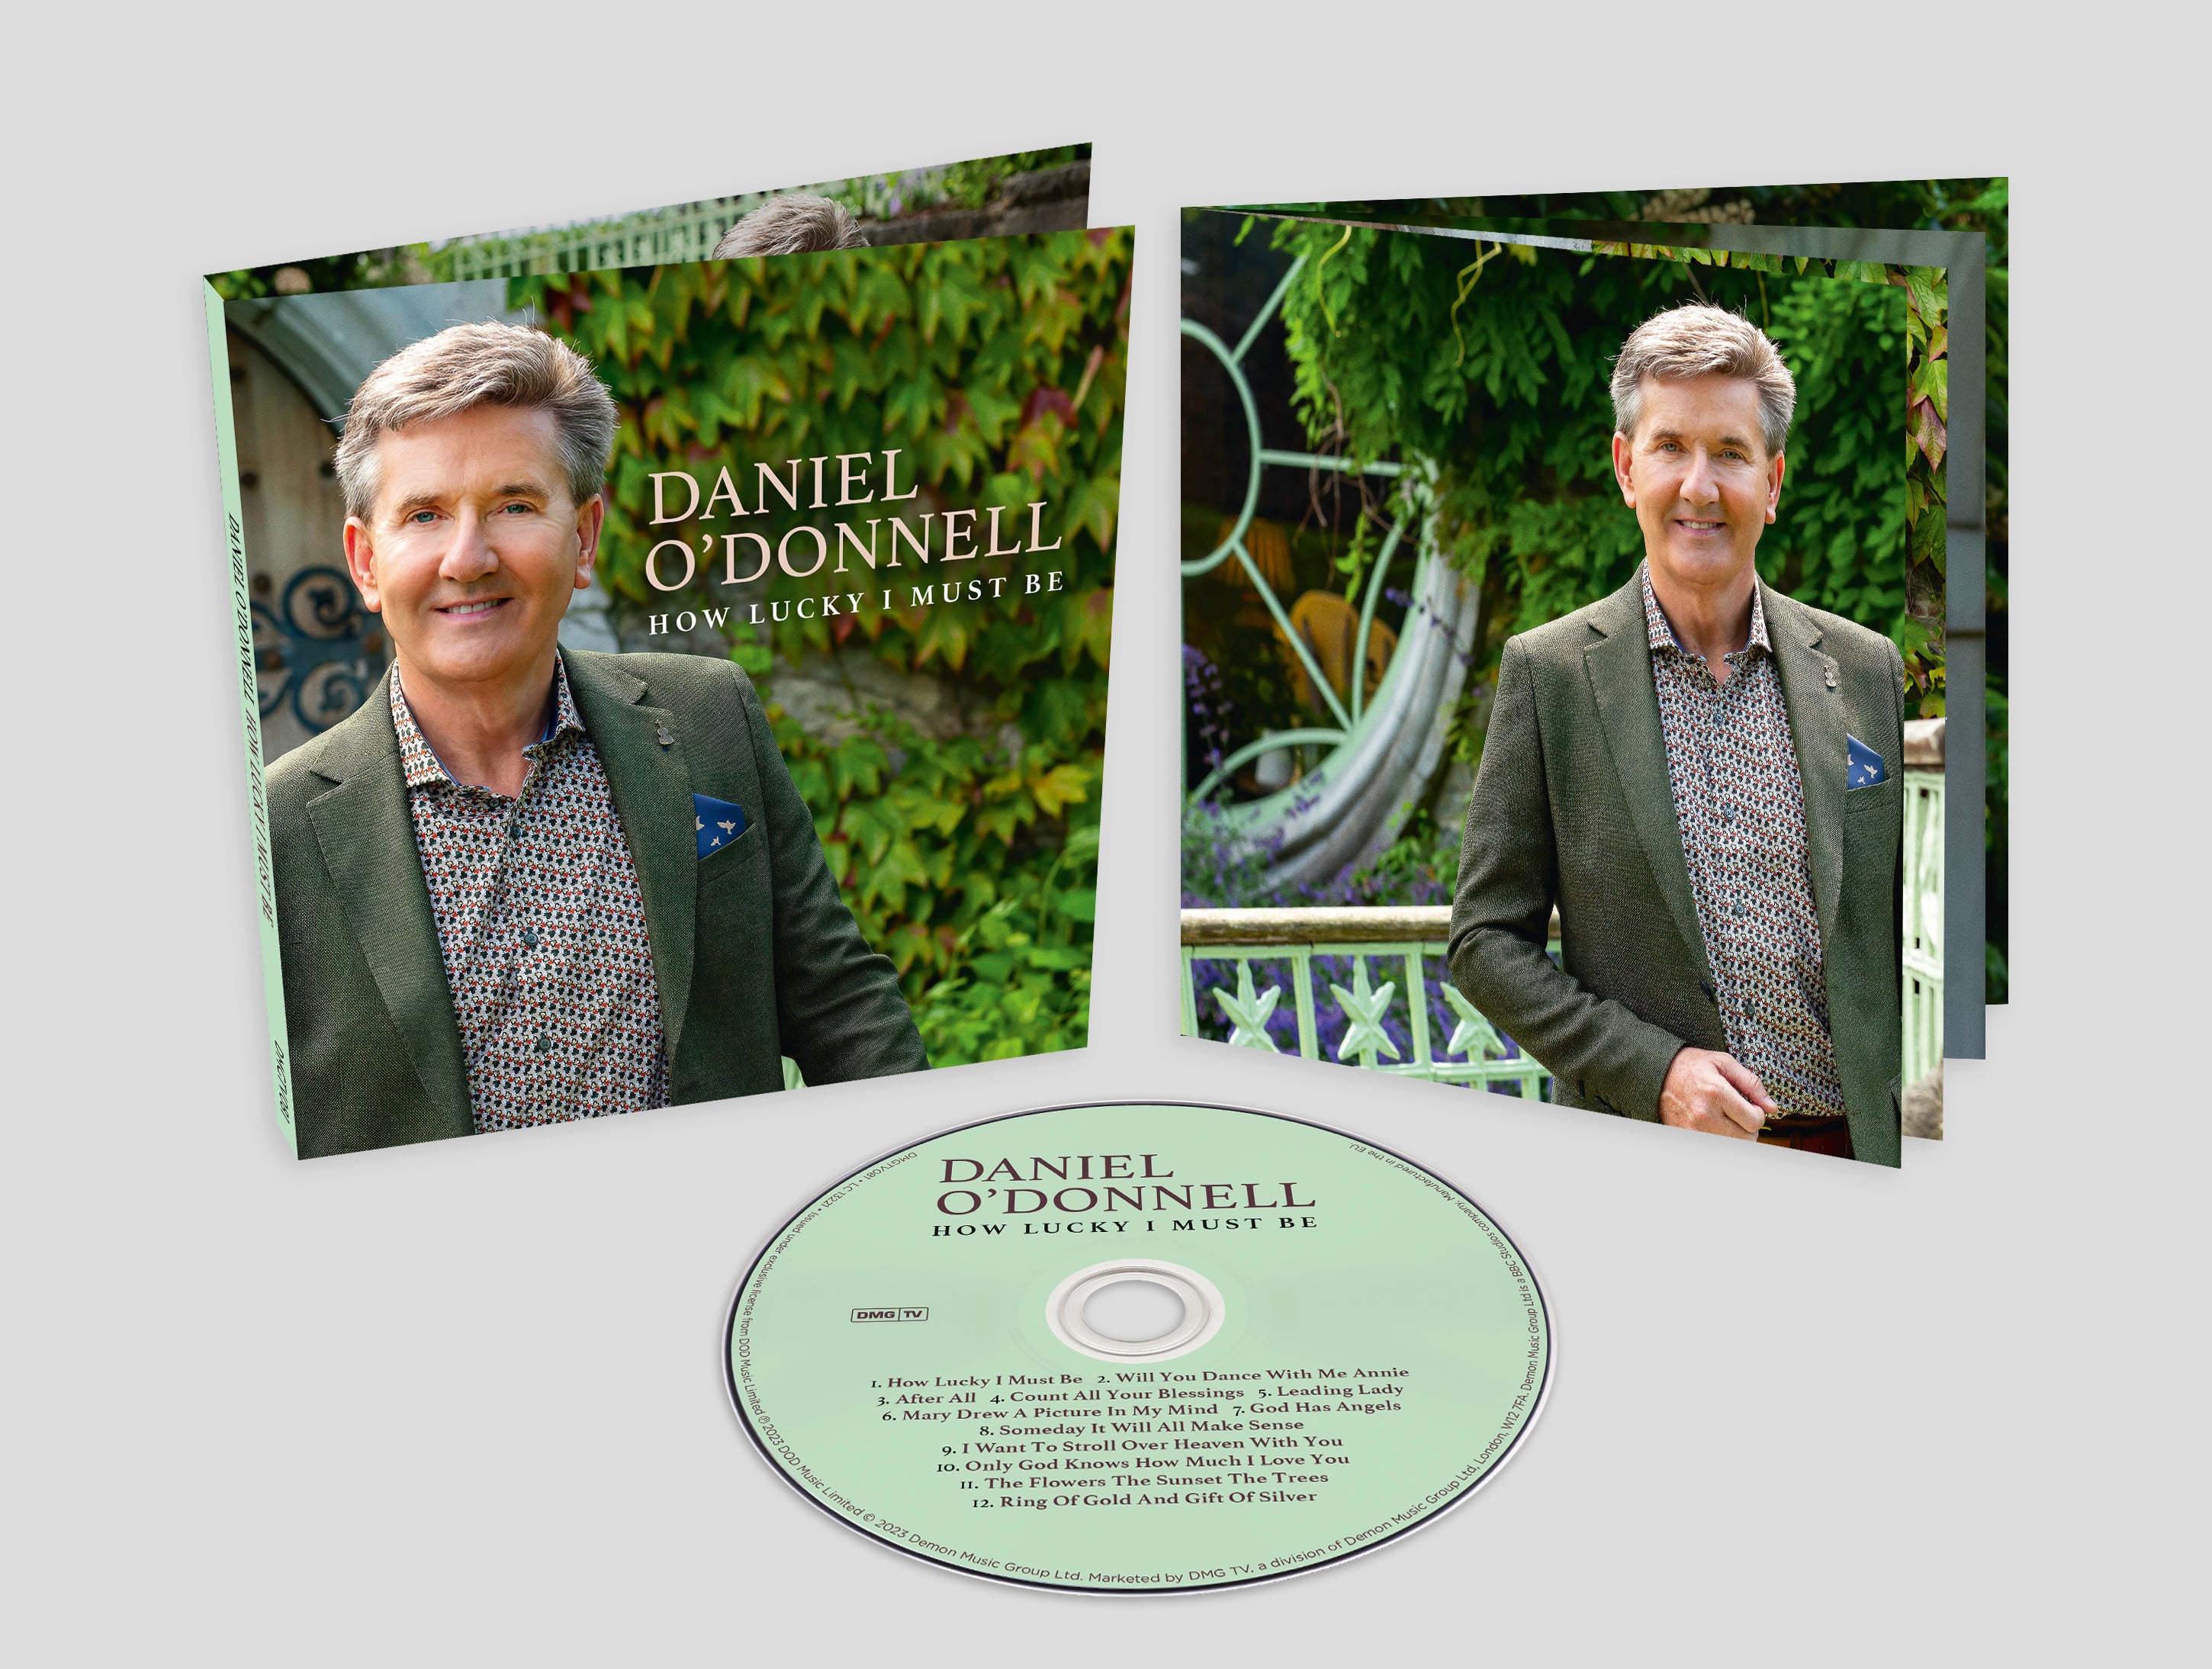 DANIEL O'DONNELL - HOW LUCKY I MUST BE (SIGNED)